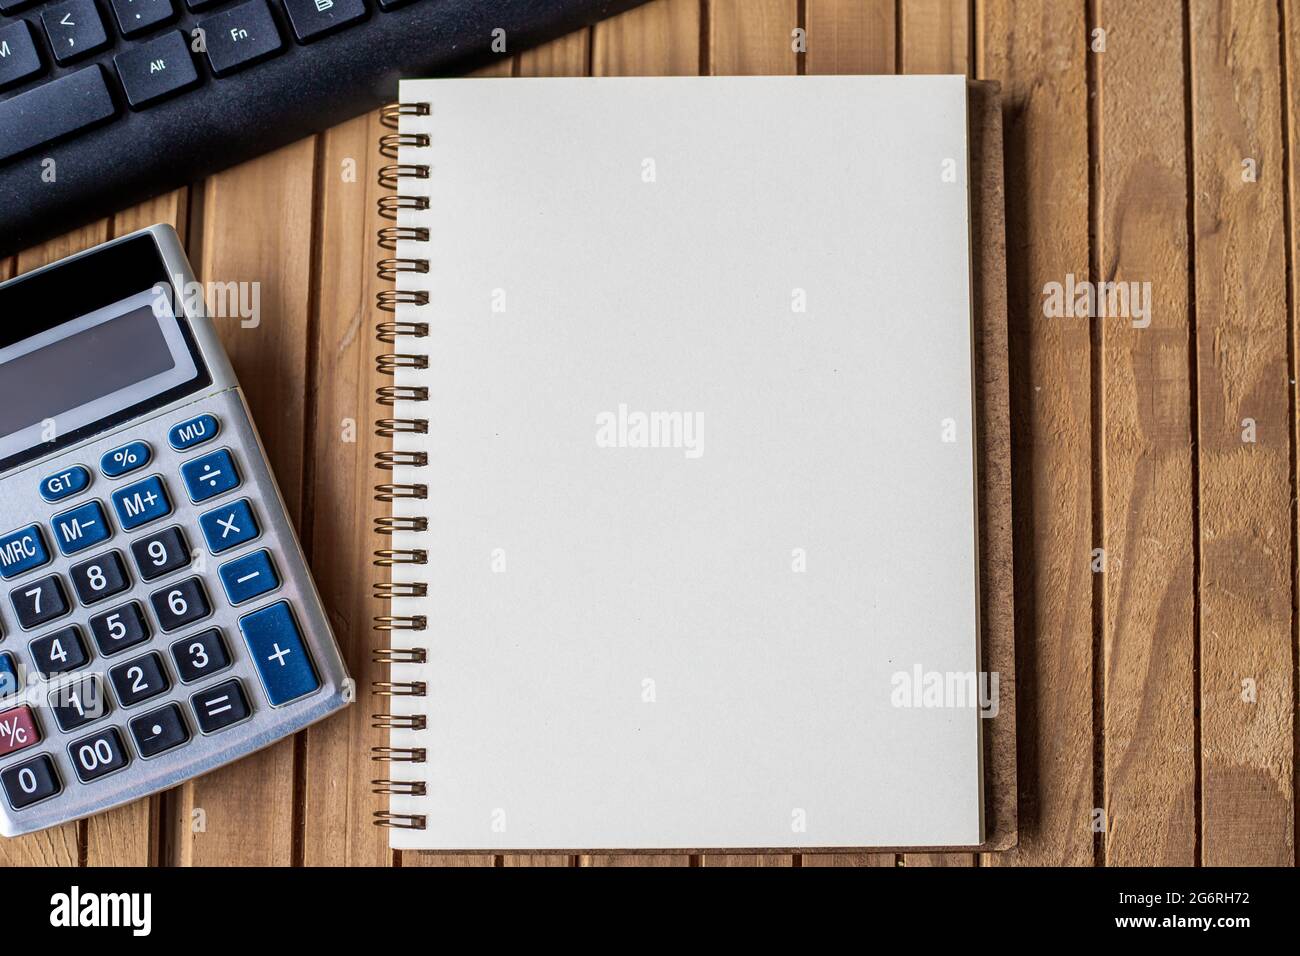 Blank Opened Spiral Notebook With A Calculator Keyboard Pen Placed Over  Table. Empty Lined Notepad And Pencil On Top Of A Desk With A Calculation  Stock Photo - Alamy